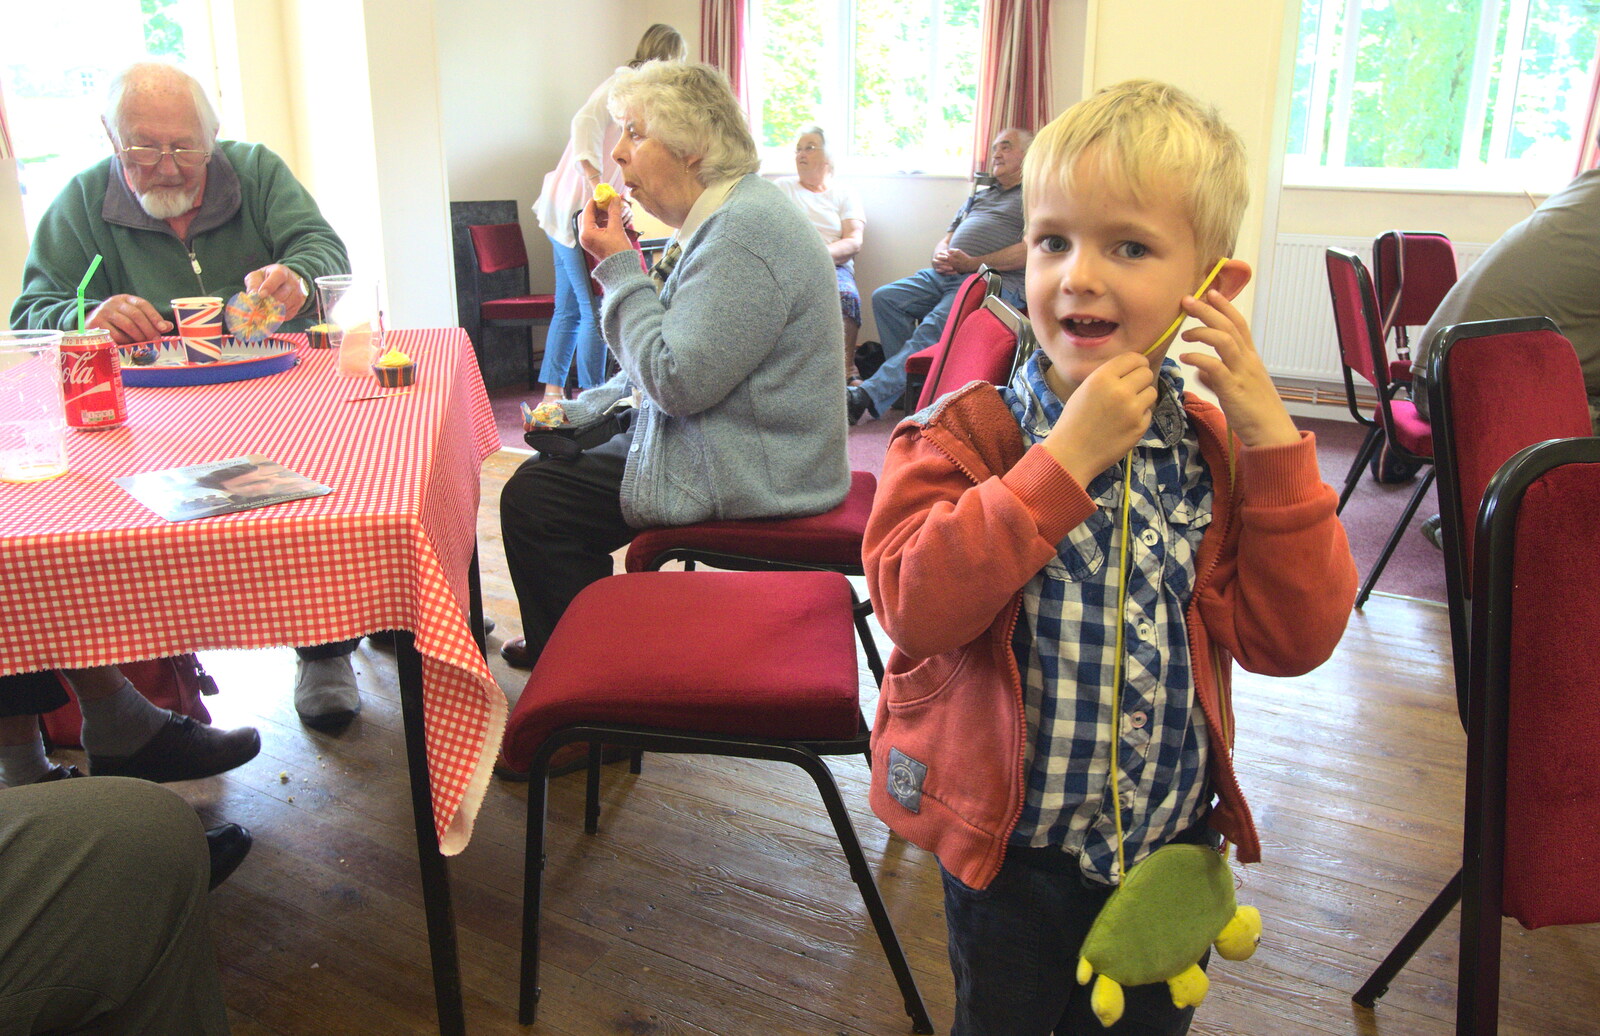 Harry hangs his purse from his ear for some reason from The Queen's Village Hall Birthday, Brome, Suffolk - 12th June 2016